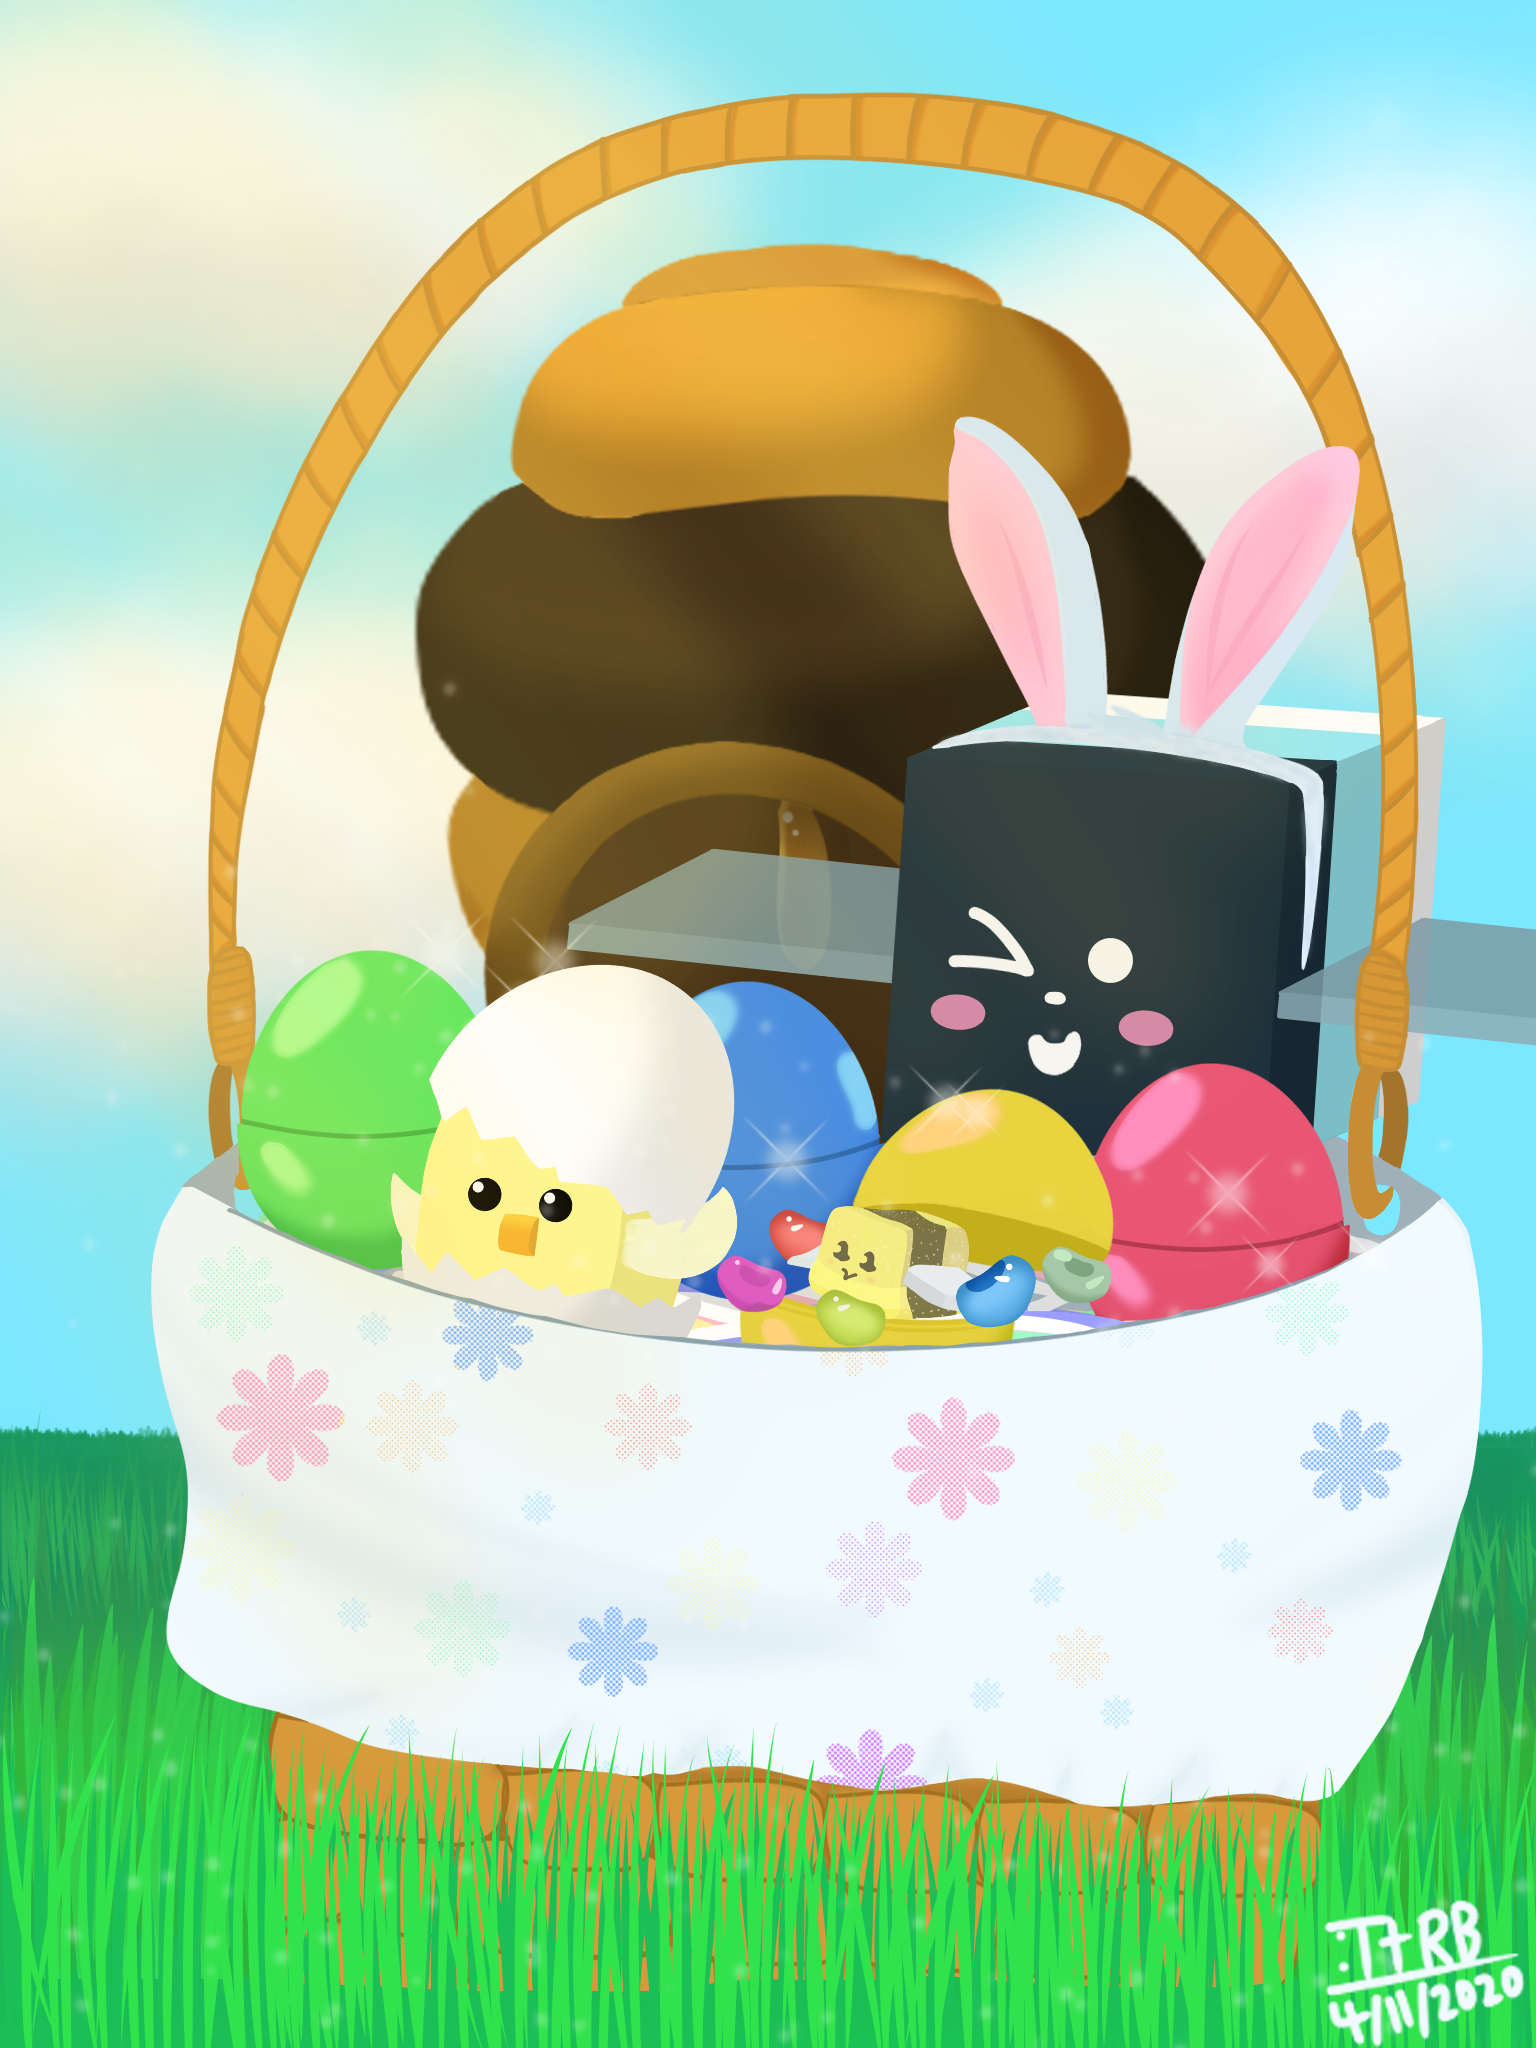 new-easter-update-plastic-egg-locations-marshmallow-bee-more-bee-swarm-simulator-youtube